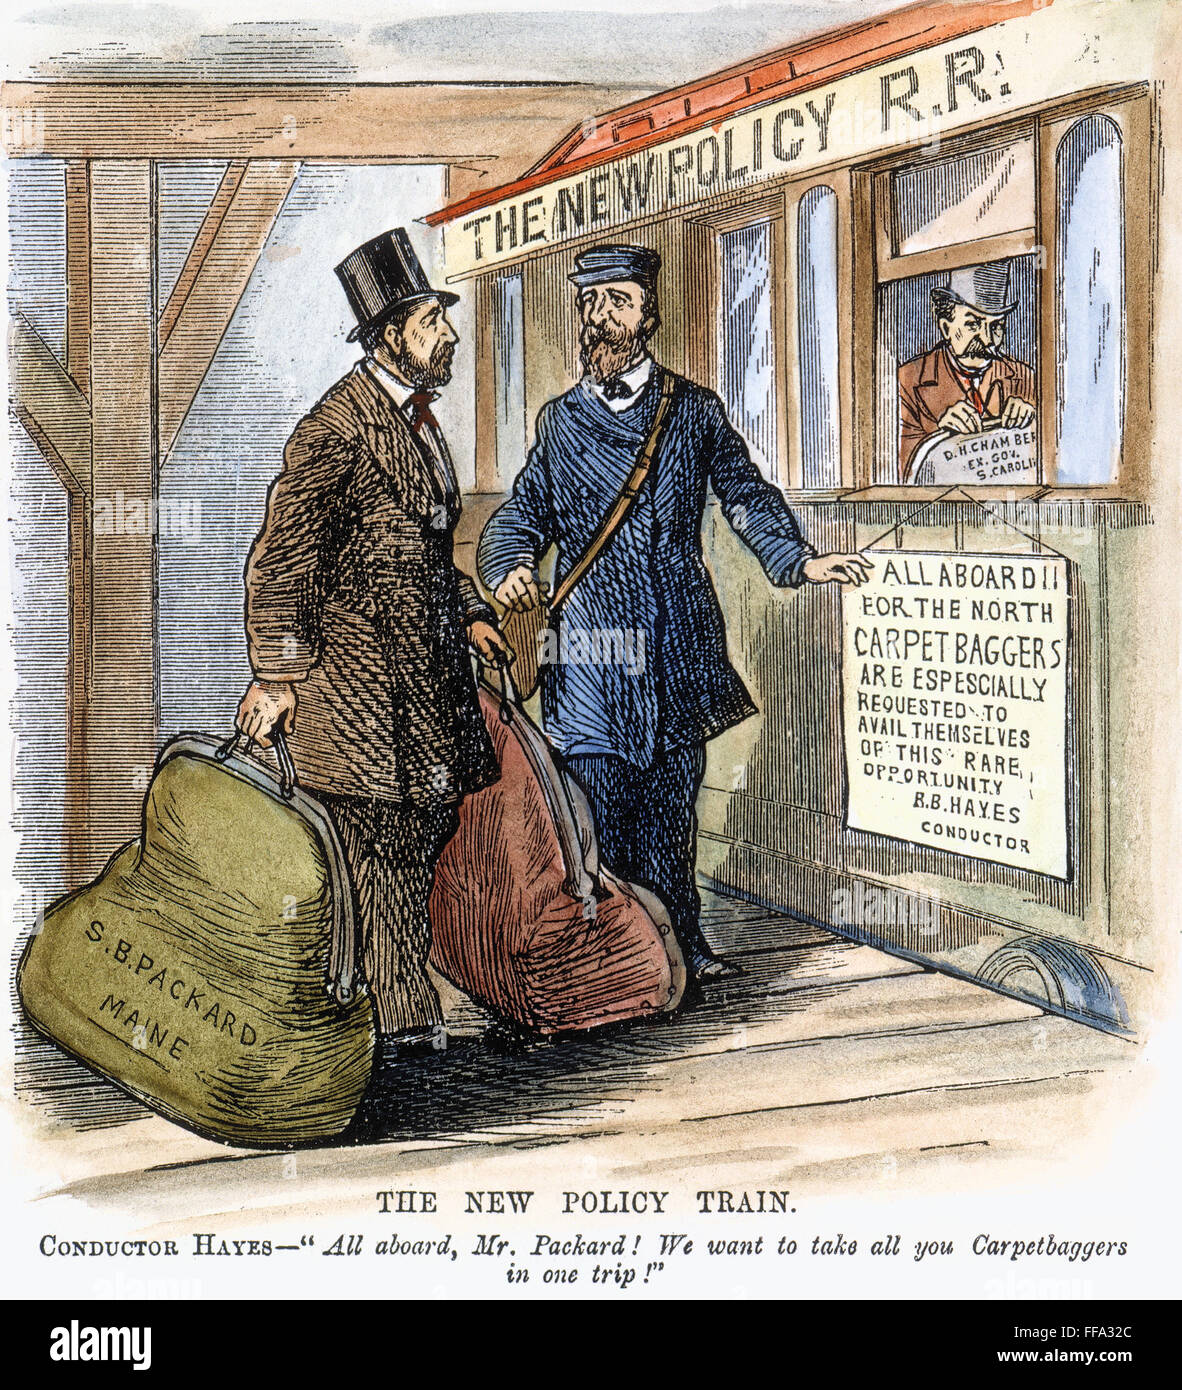 R. B. HAYES: CARPETBAGGERS. /nThe New Policy Train: After the withdrawal of Federal troops from the South, President Hayes conducts a carpetbagger to a train heading north: cartoon from an American newspaper of 1877. Stock Photo